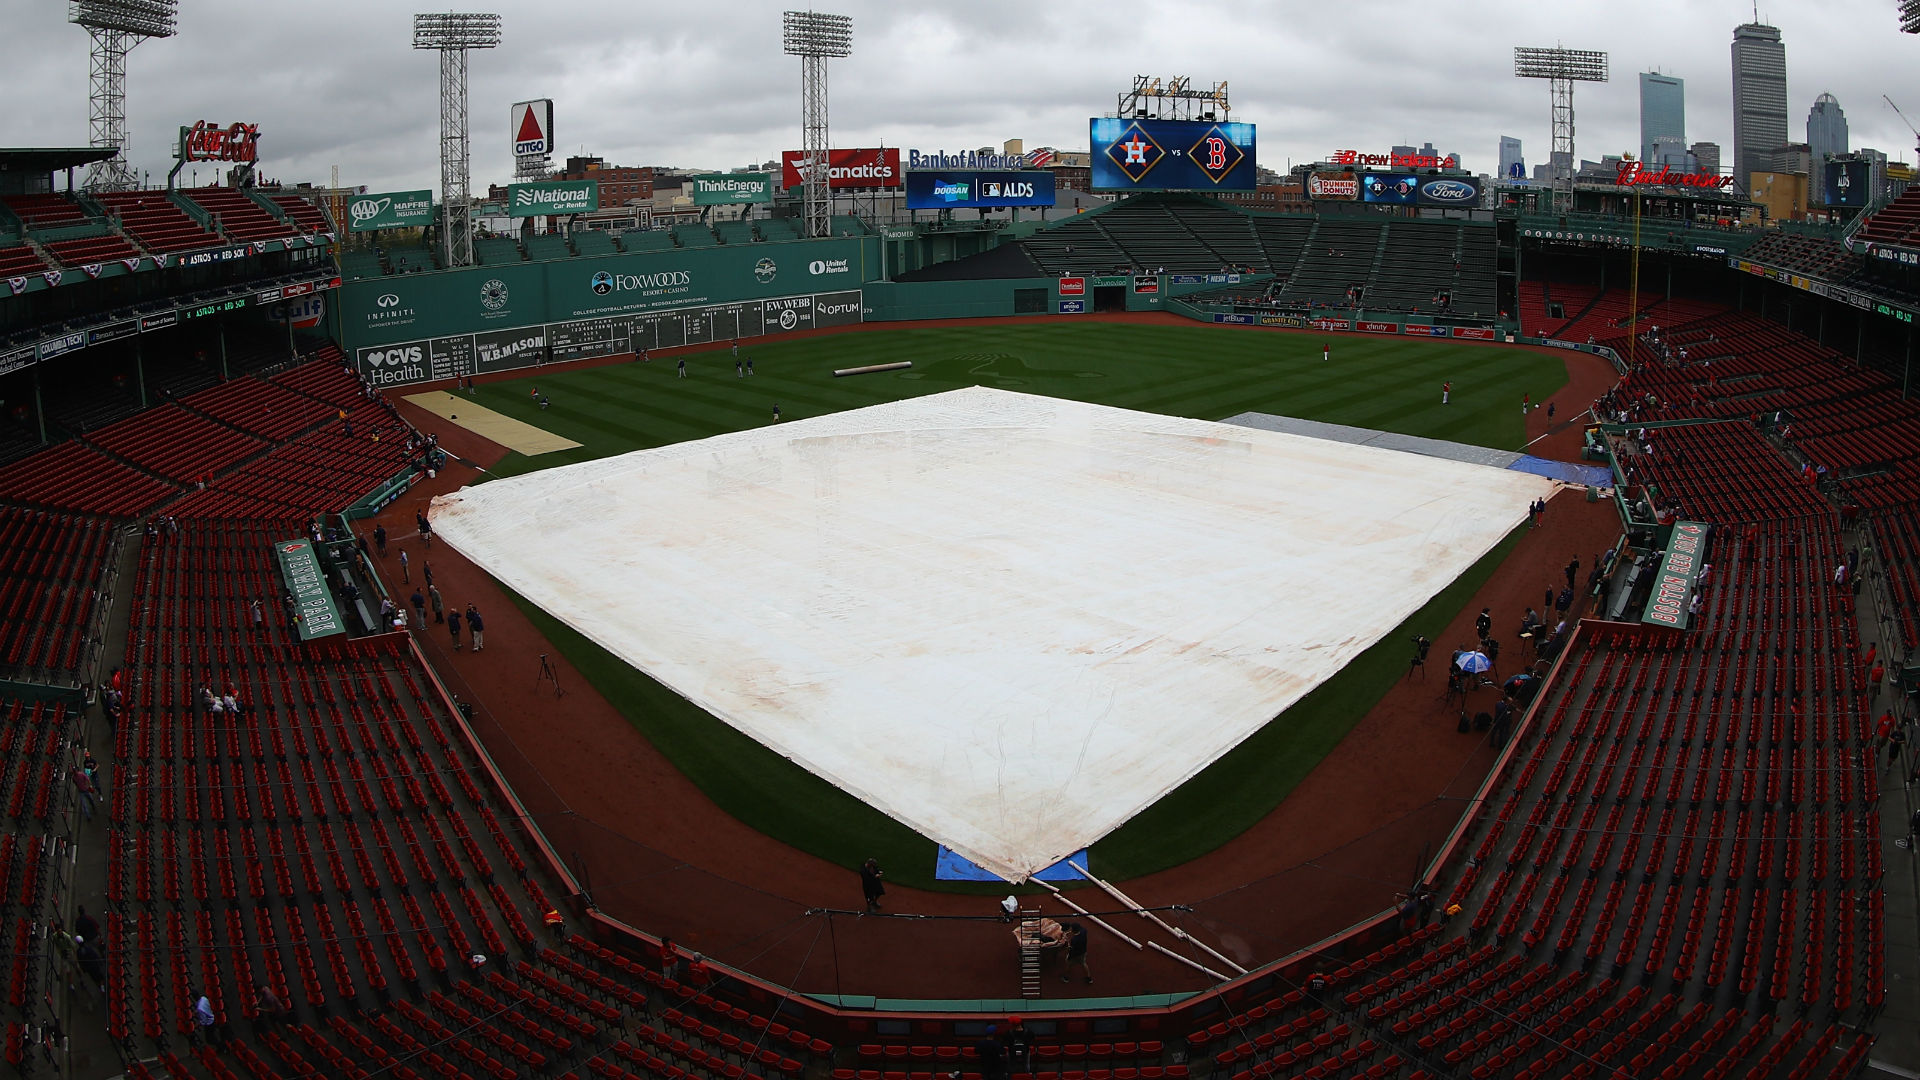 Monday's Patriots Day game at Fenway Park rained out | MLB ...